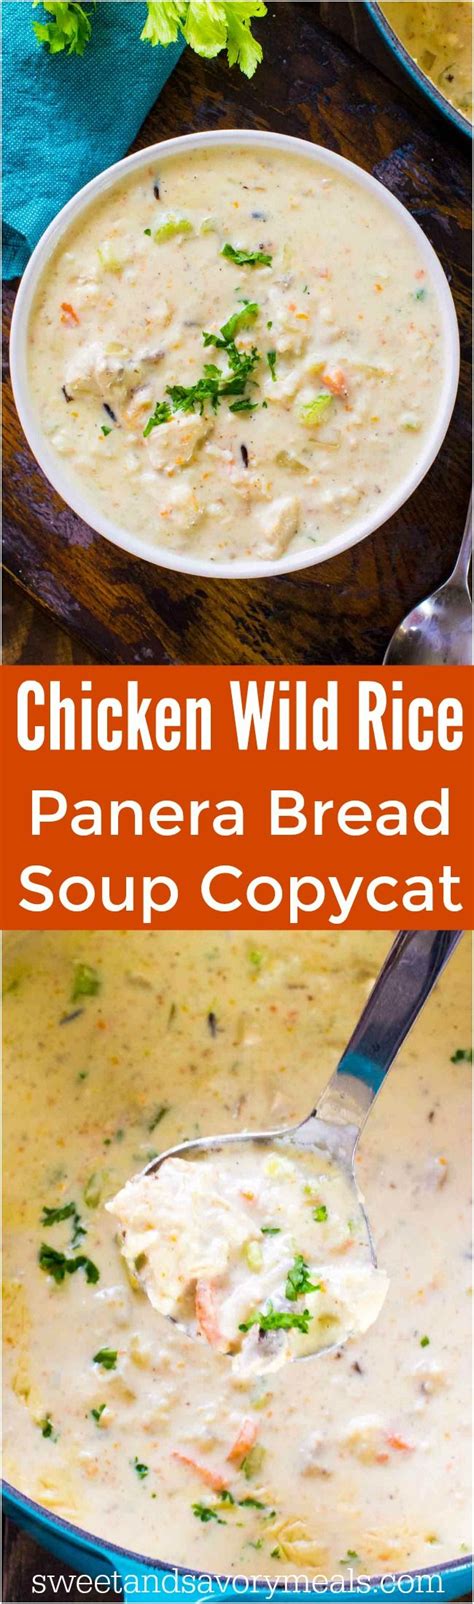 Recipe by ashley @ wishes & dishes. Panera Bread Chicken Wild Rice Soup Copycat [VIDEO ...